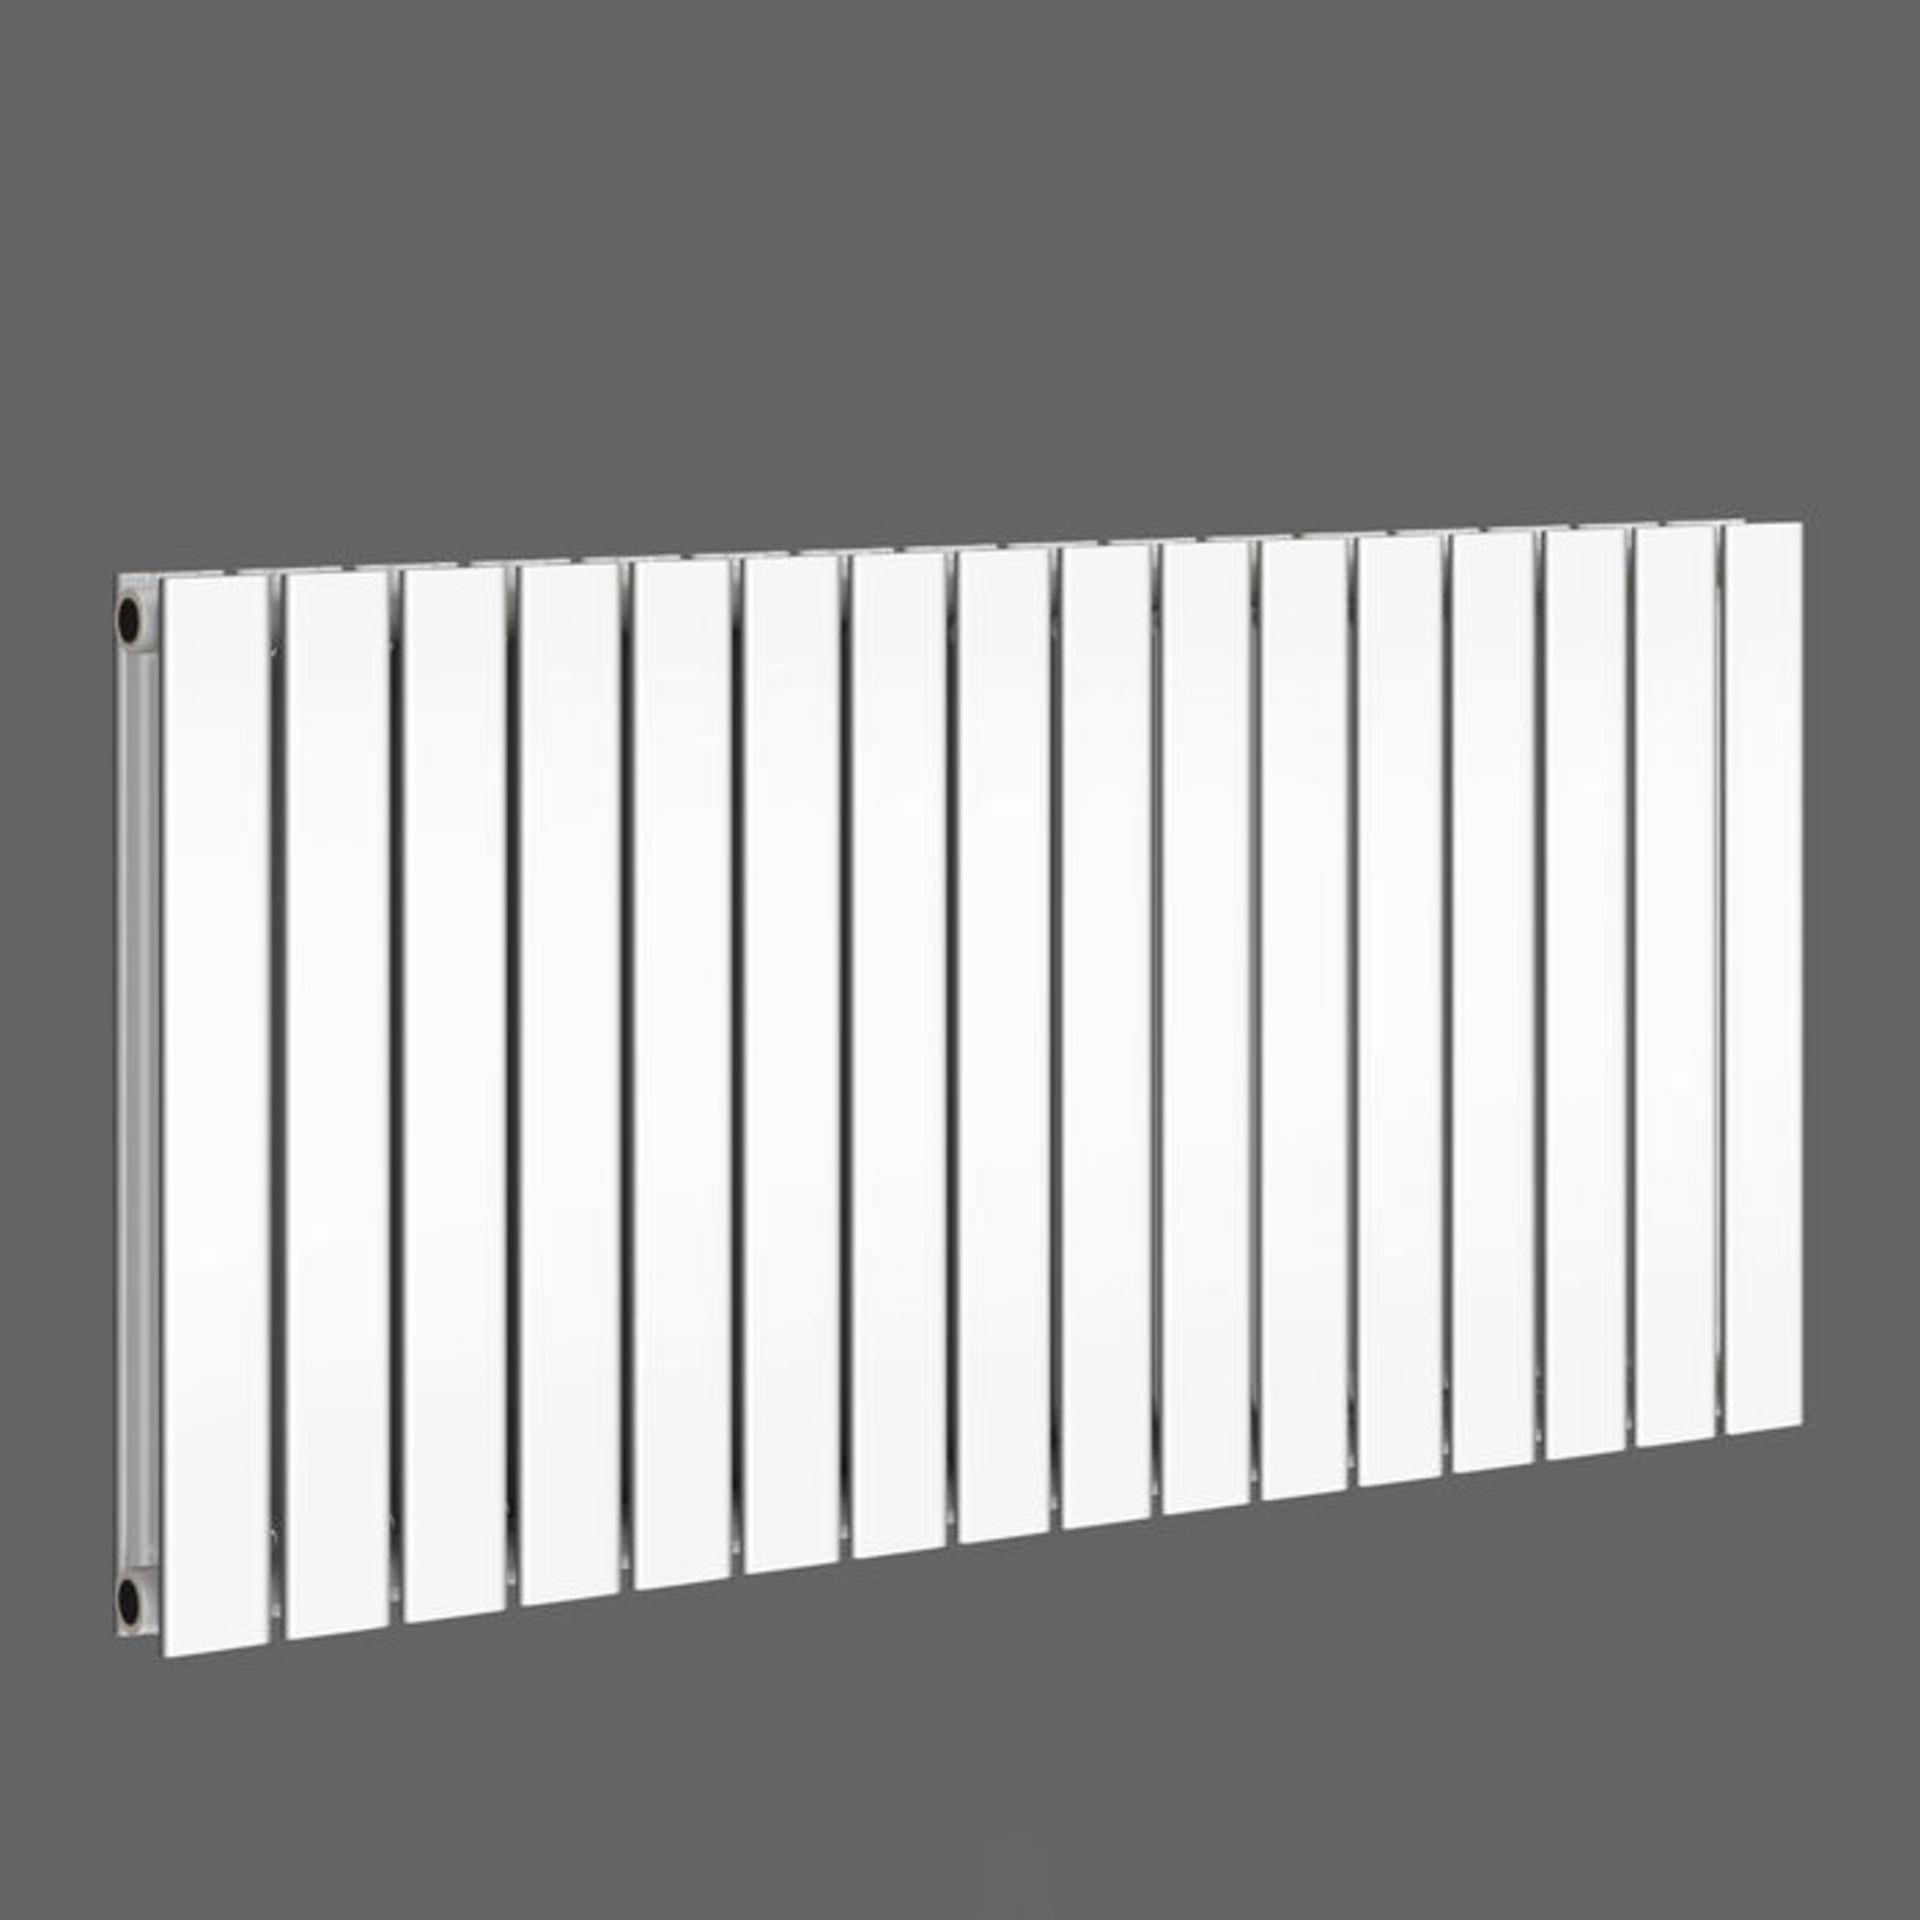 (TT16) 600x1210mm Gloss White Double Flat Panel Horizontal Radiator. RRP £499.99. Made with ... - Image 5 of 5